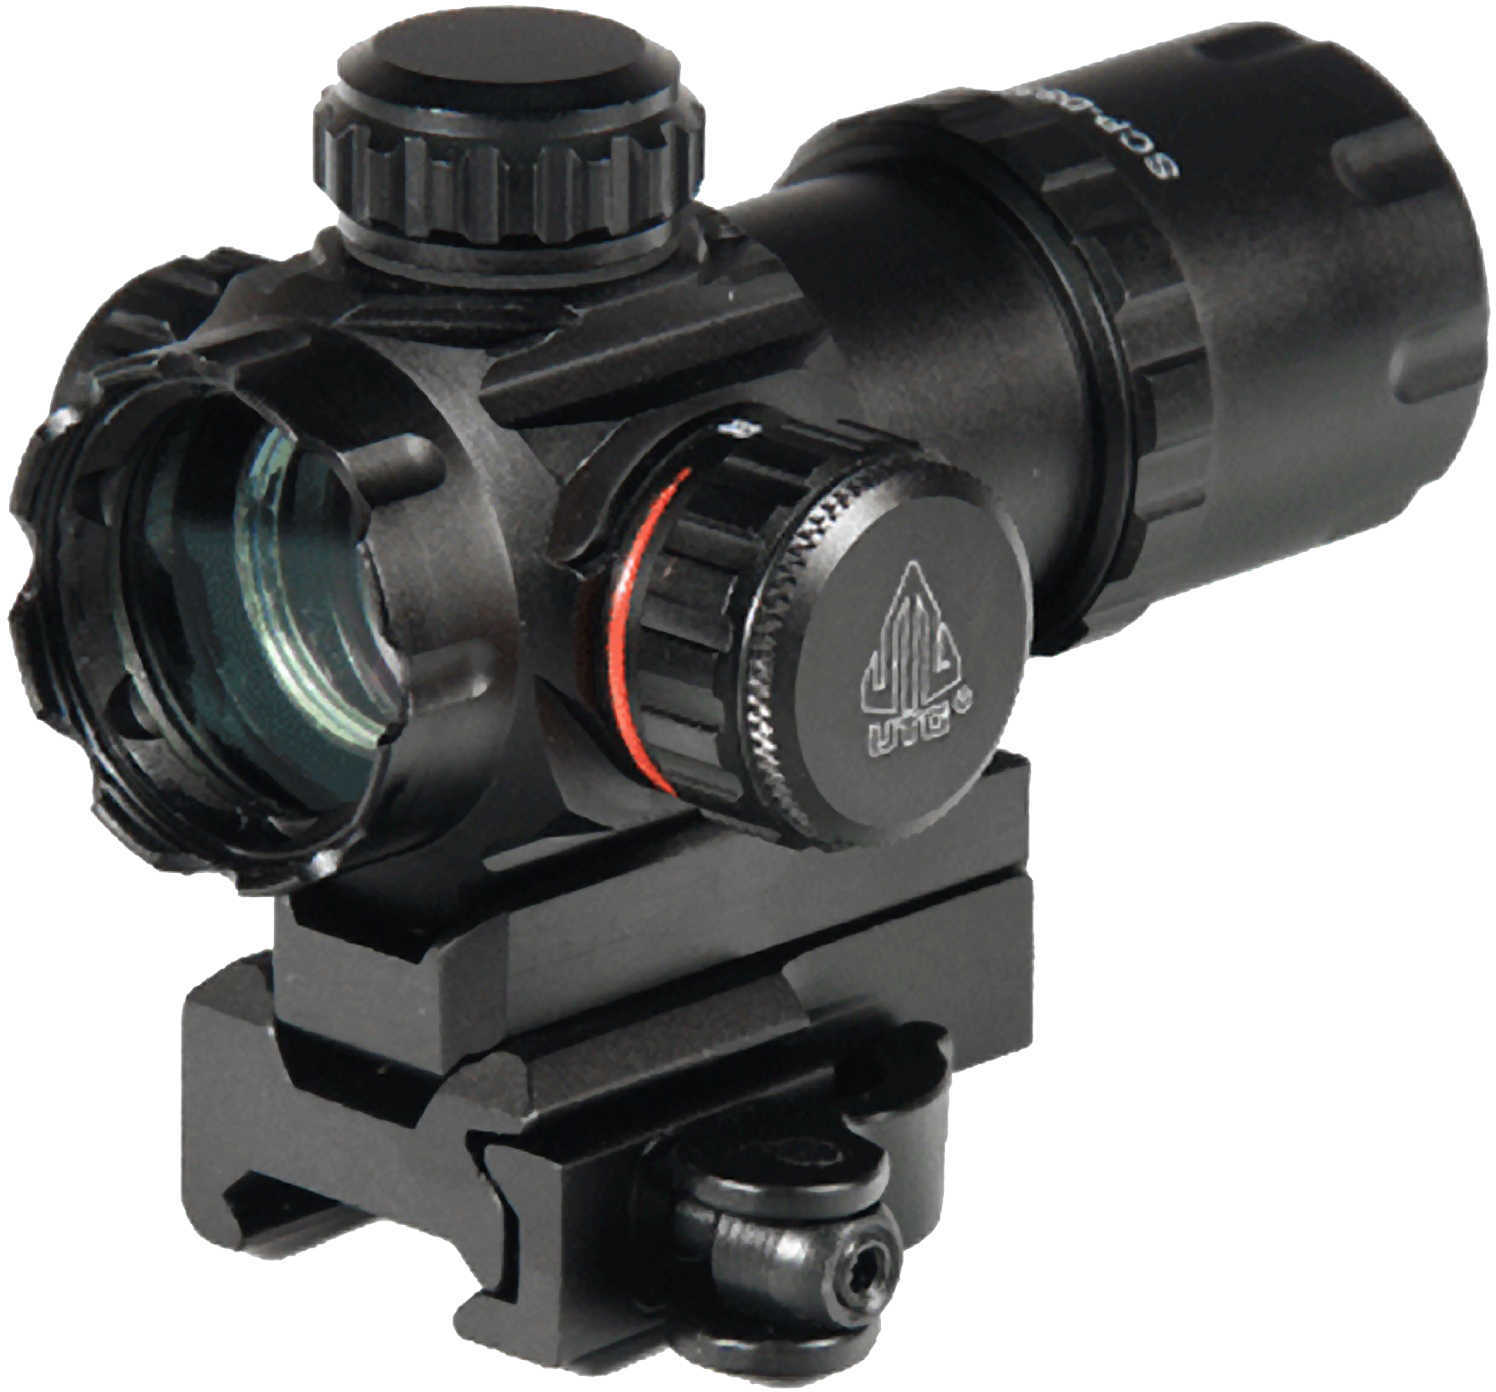 Leapers UTG 3.9" ITA Red/Green CQB Dot Sight With Integral QD Mount Md: SCP-DS3039W